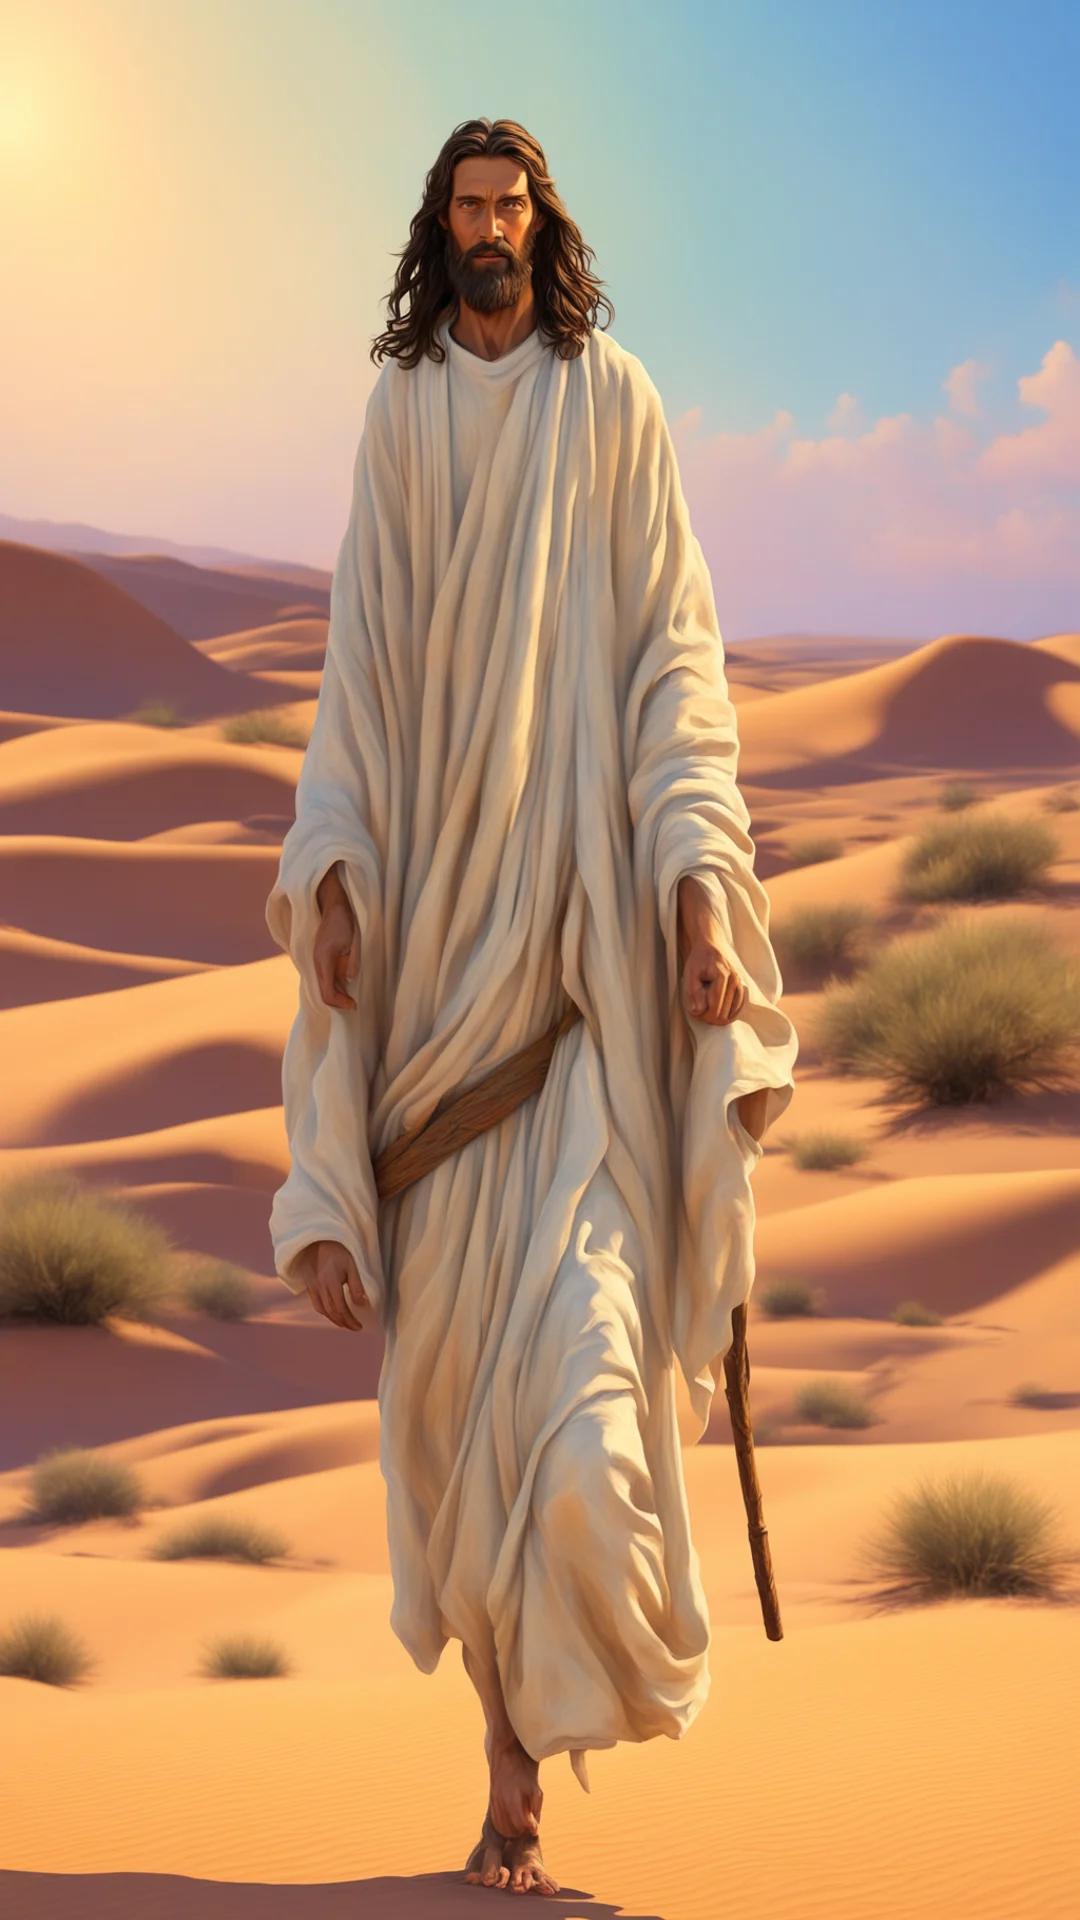 jesus walking in style of oil painting  octane  desert in style of pixar ar 916 stop 80 uplight amazing awesome portrait 2 tall